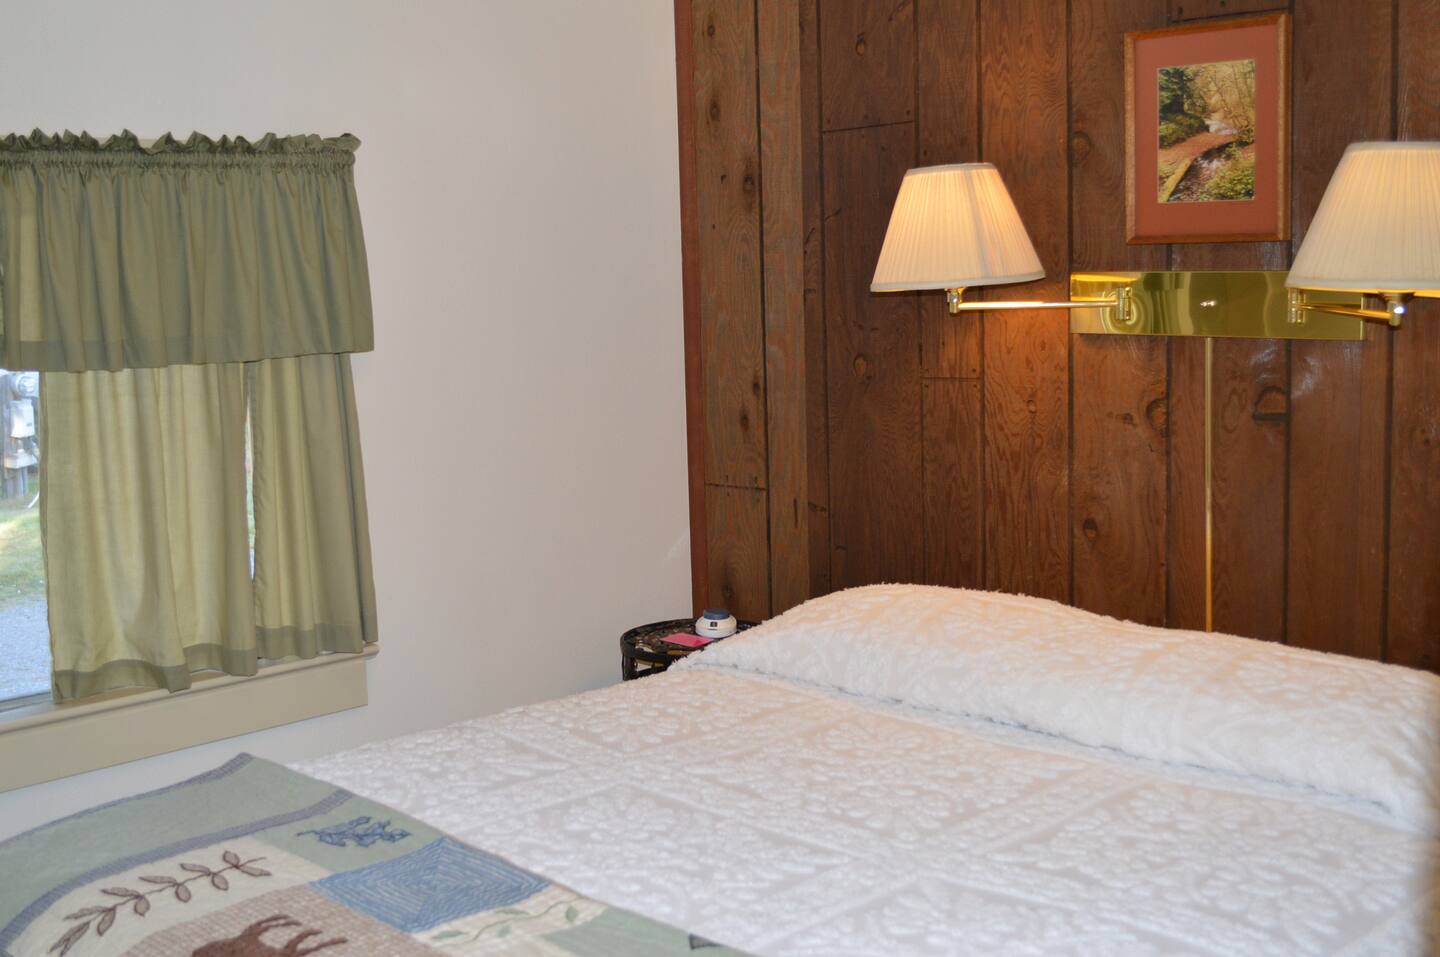 Bedrooms, with queen bed, heated mattress pad, small closet, and chest of drawers.